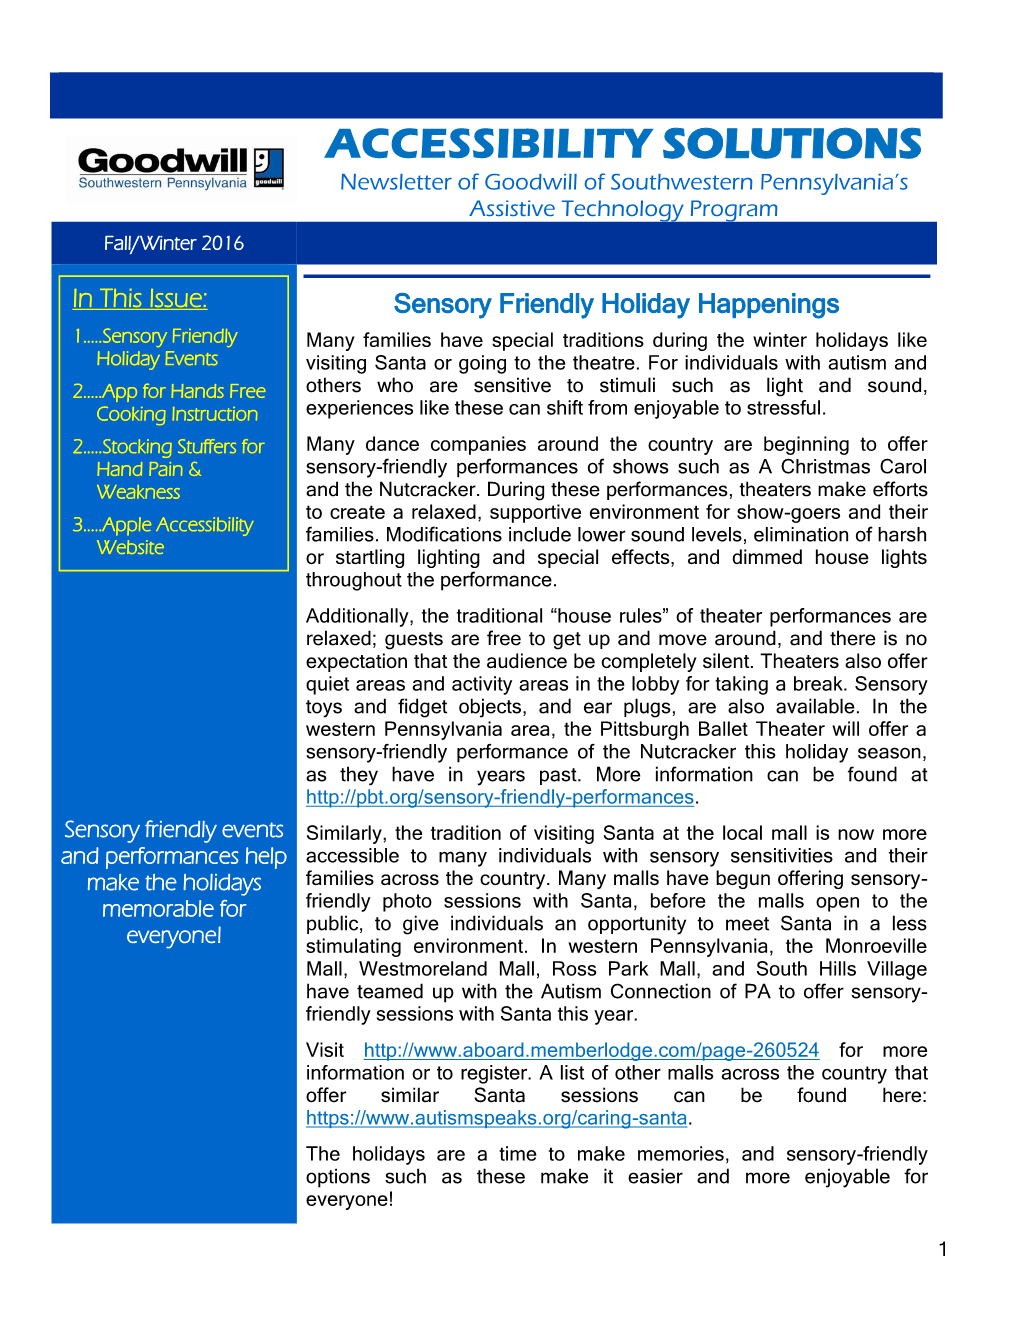 ACCESSIBILITY SOLUTIONS Newsletter of Goodwill of Southwestern Pennsylvania’S Assistive Technology Program Fall/Winter 2016